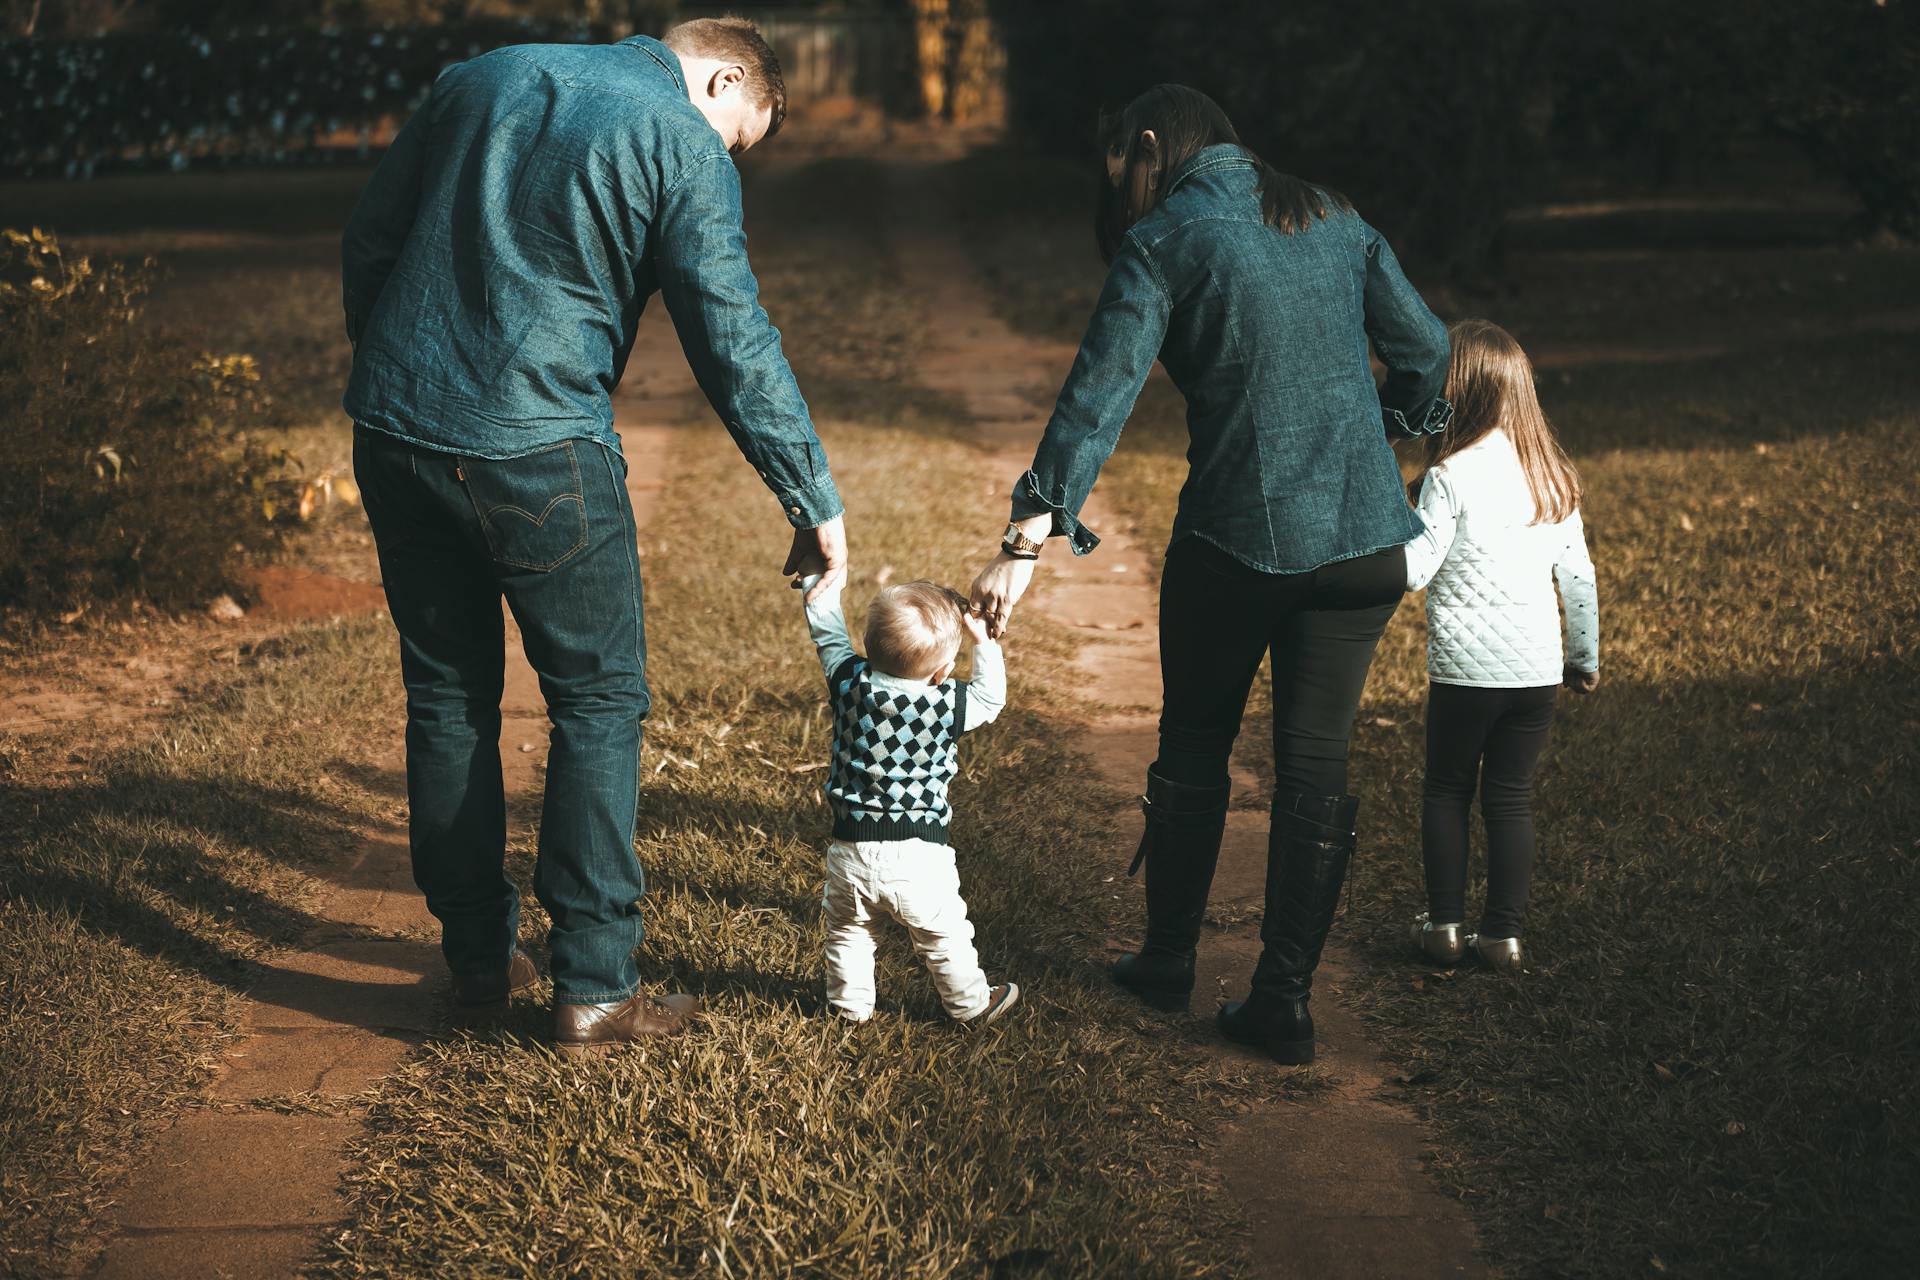 A couple walking with their children | Source: Pexels